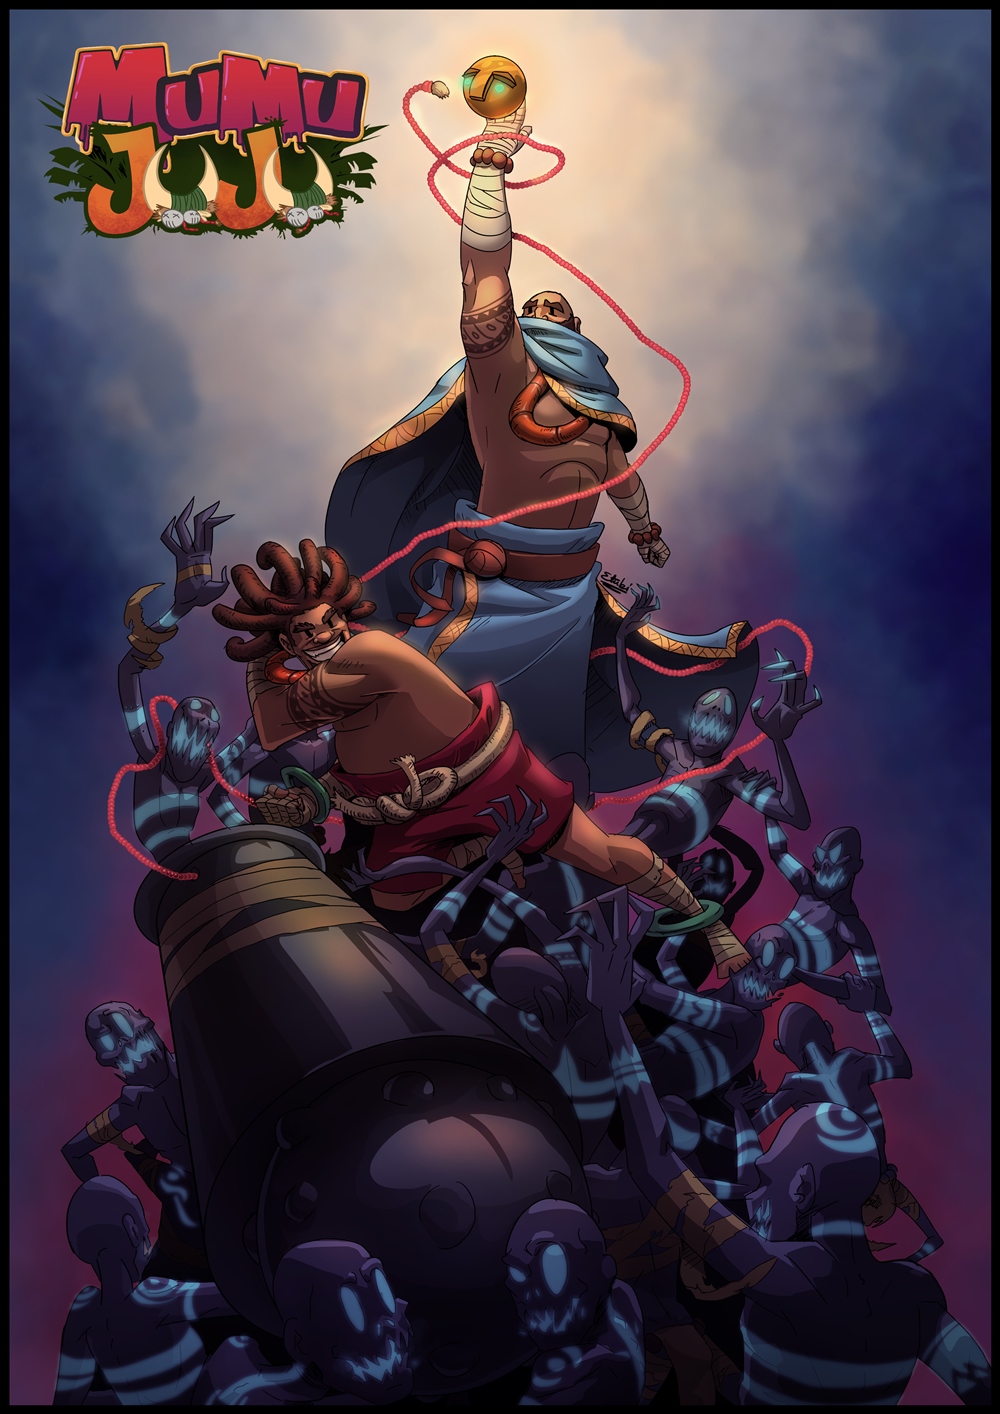 Promotional poster of Mumu Juju, a hilarious comic book from Africa created by Etubi Onucheyo and published by Vortex Comics in Nigeria.